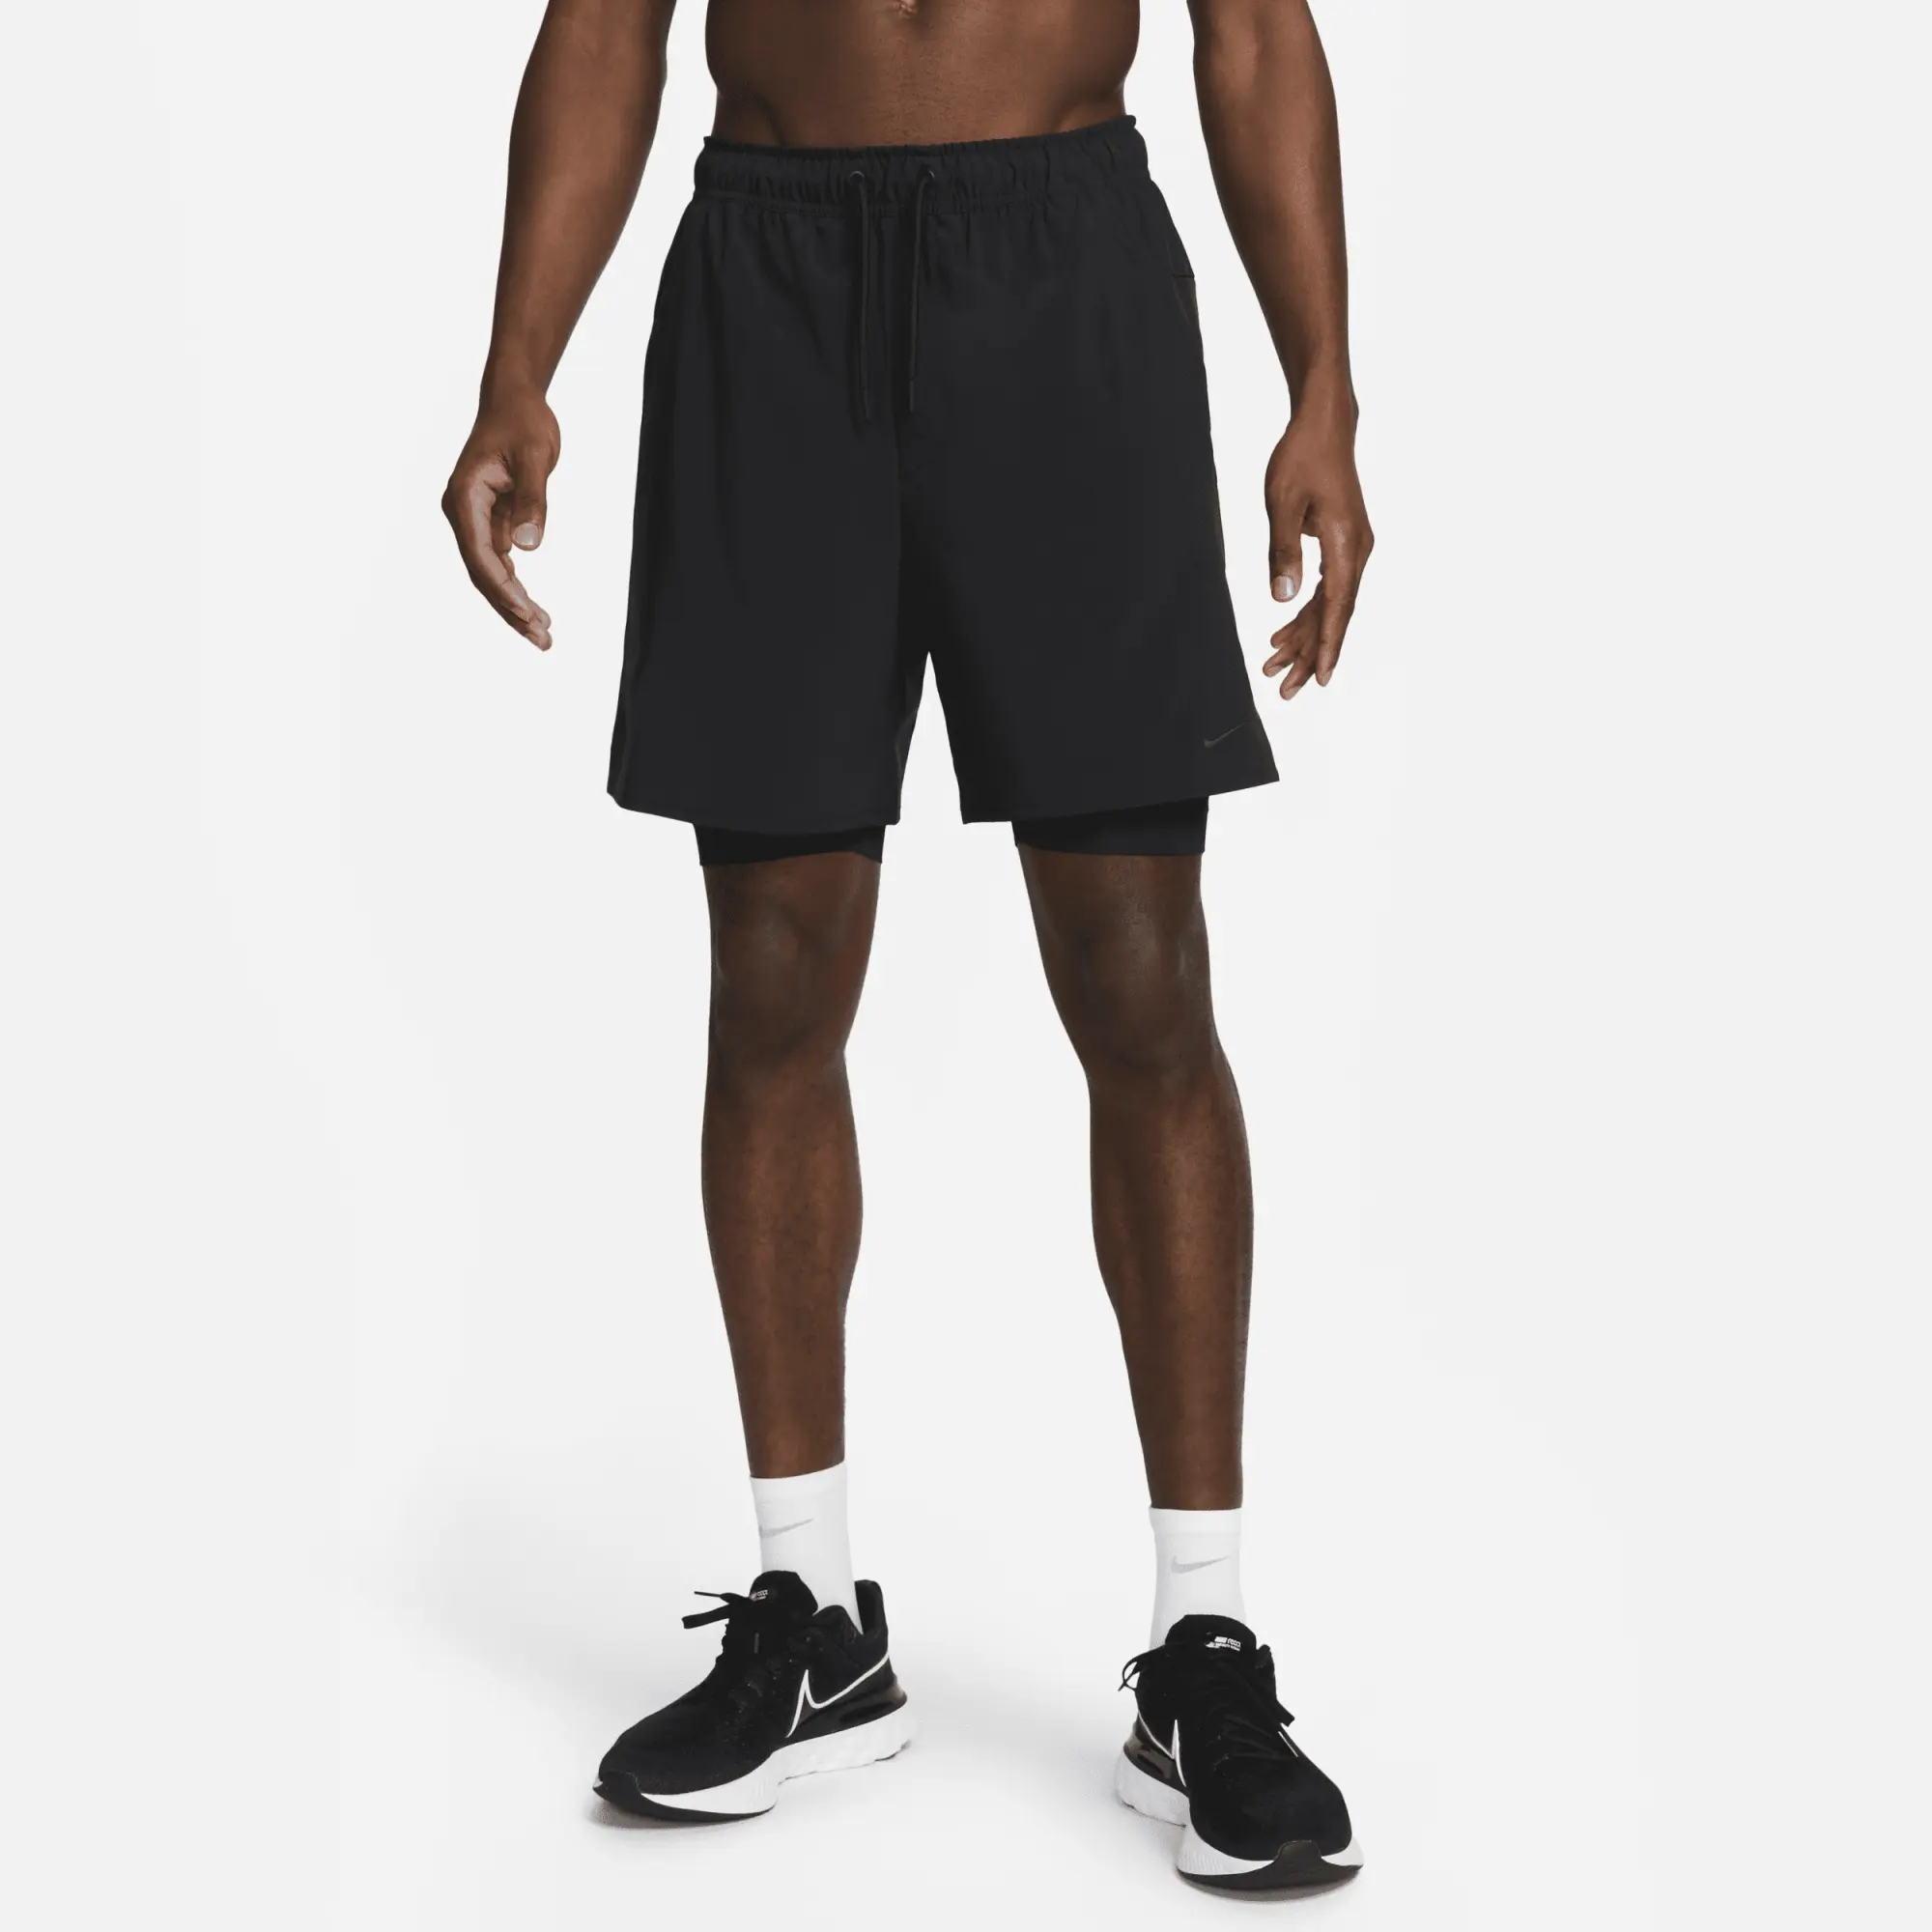 Nike Running Shorts Unlimited Woven 7 2In1 - Black